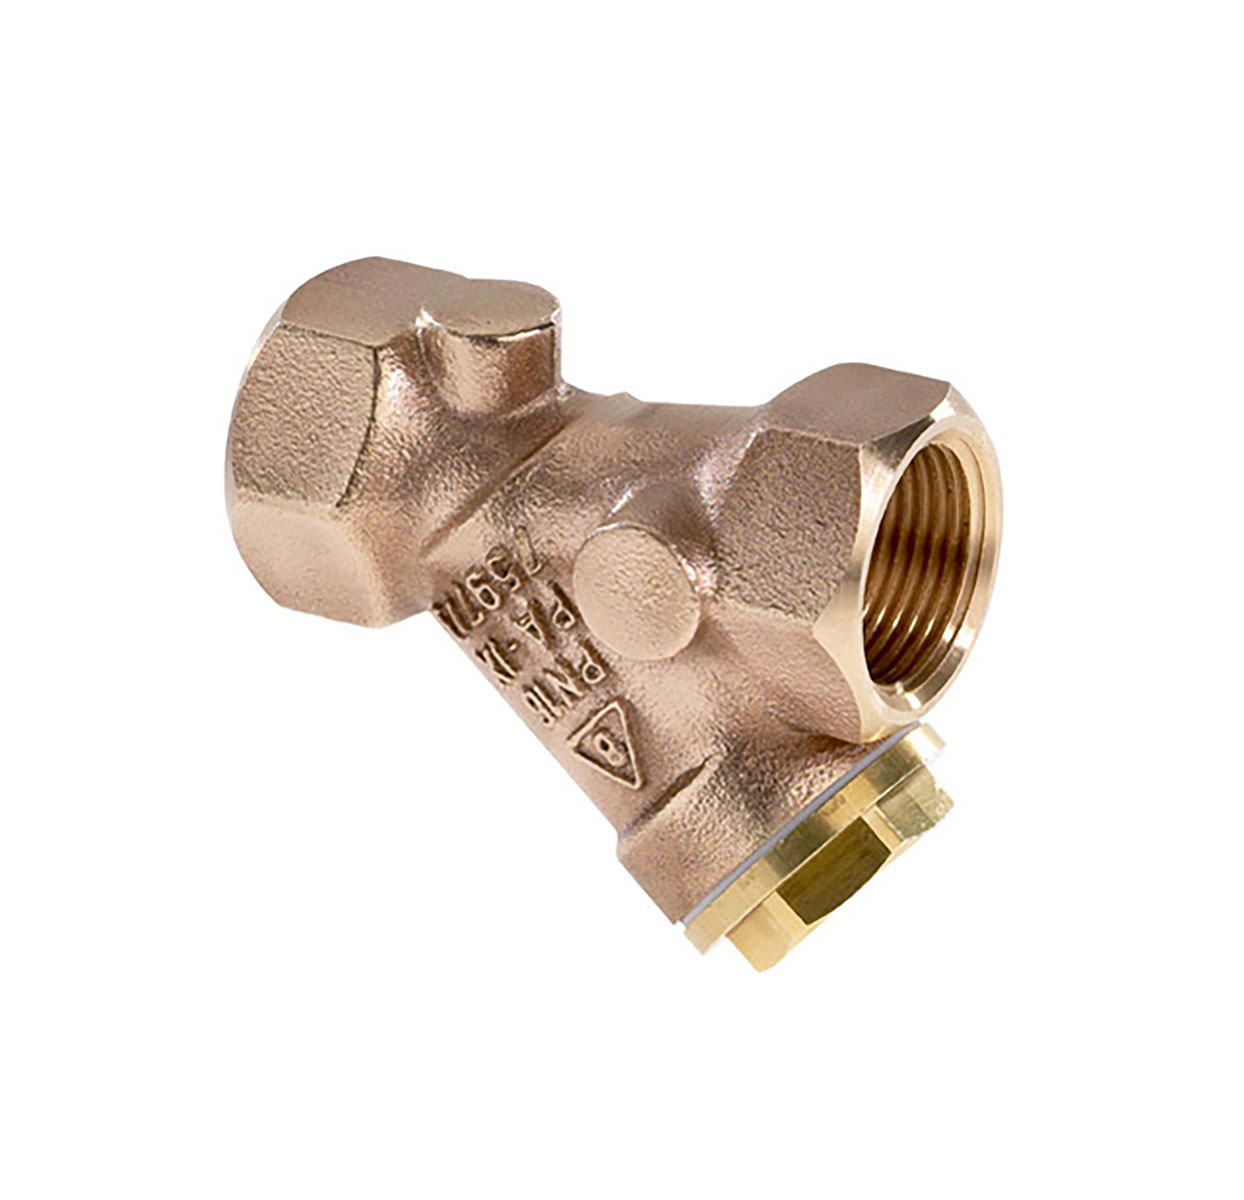 2450200 - Red-brass Strainer Strainer with PTFE-sealing (Teflon)